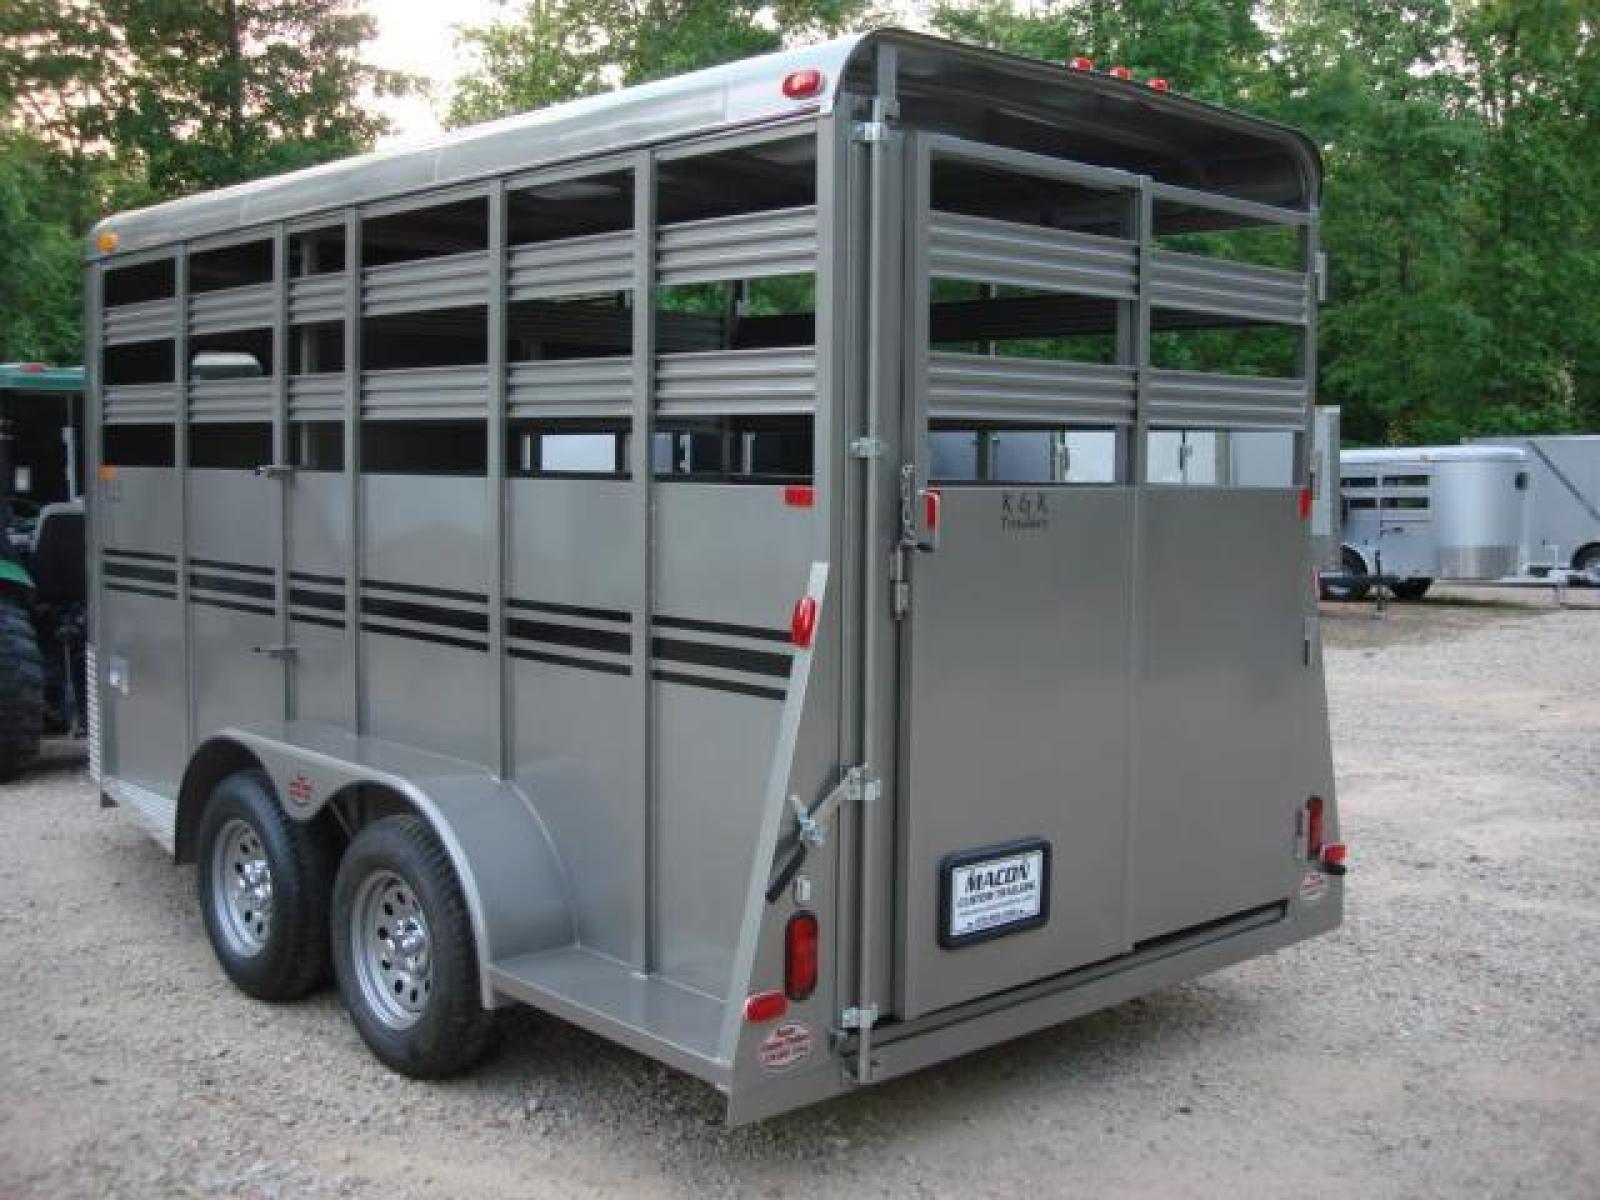 2022 Pewter Metallic! Bee Trailers Horse & Livestock , located at 1330 Rainey Rd., Macon, 31220, (478) 960-1044, 32.845638, -83.778687 - This Trailer is on Order Now! Brand New 4 Horse & Livestock Trailer 7ft Tall with Mats Made by Bee Trailers, in South, Georgia! Haul Up to 4 Horses in Style! 7ft Tall Interior Height for Hauling Horses, Cows, Goats, Pigs, Sheep, Whatever! 6ft X 16ft is the Perfect Size. Haul All Your Animals W - Photo #2